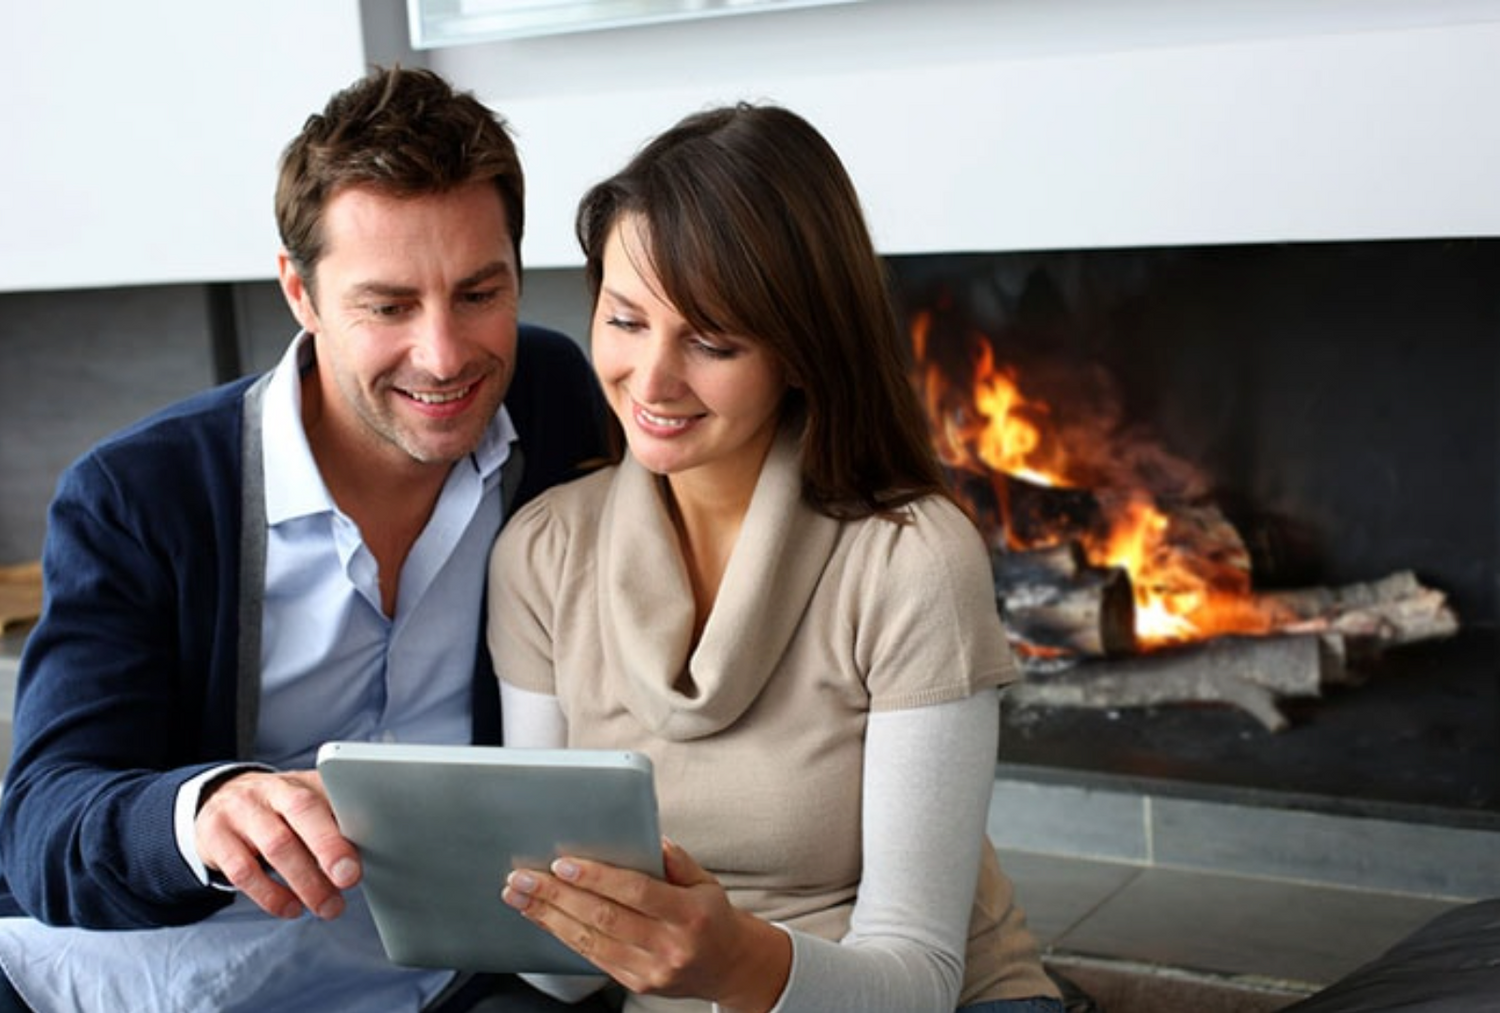 A man and woman use a tablet together in front of a fireplace